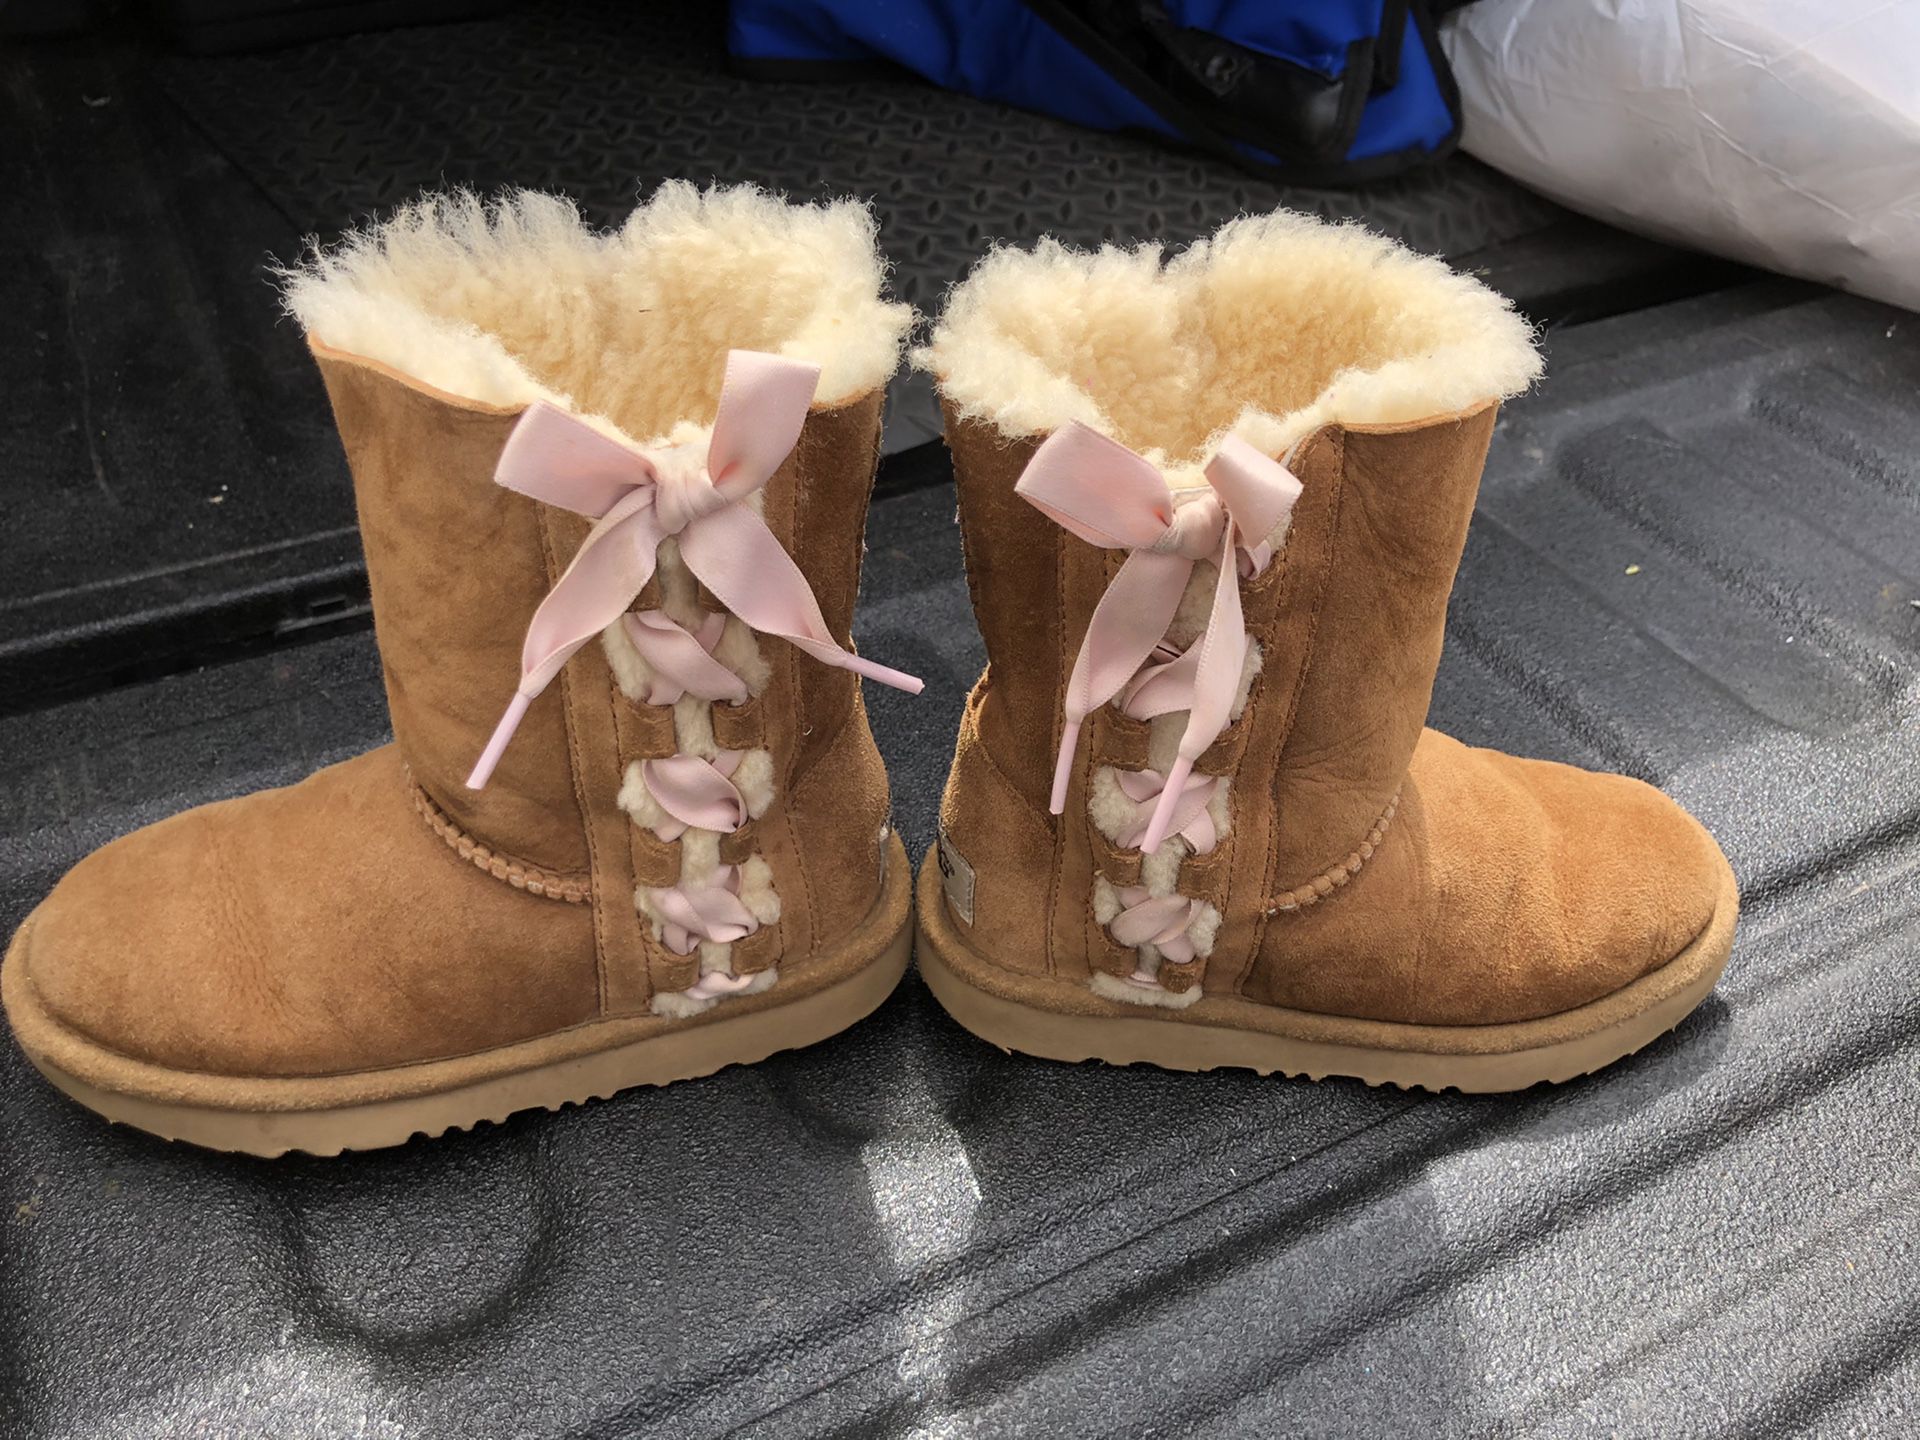 UGG boots chestnut with pink side bows, wool lining, little girls size 13